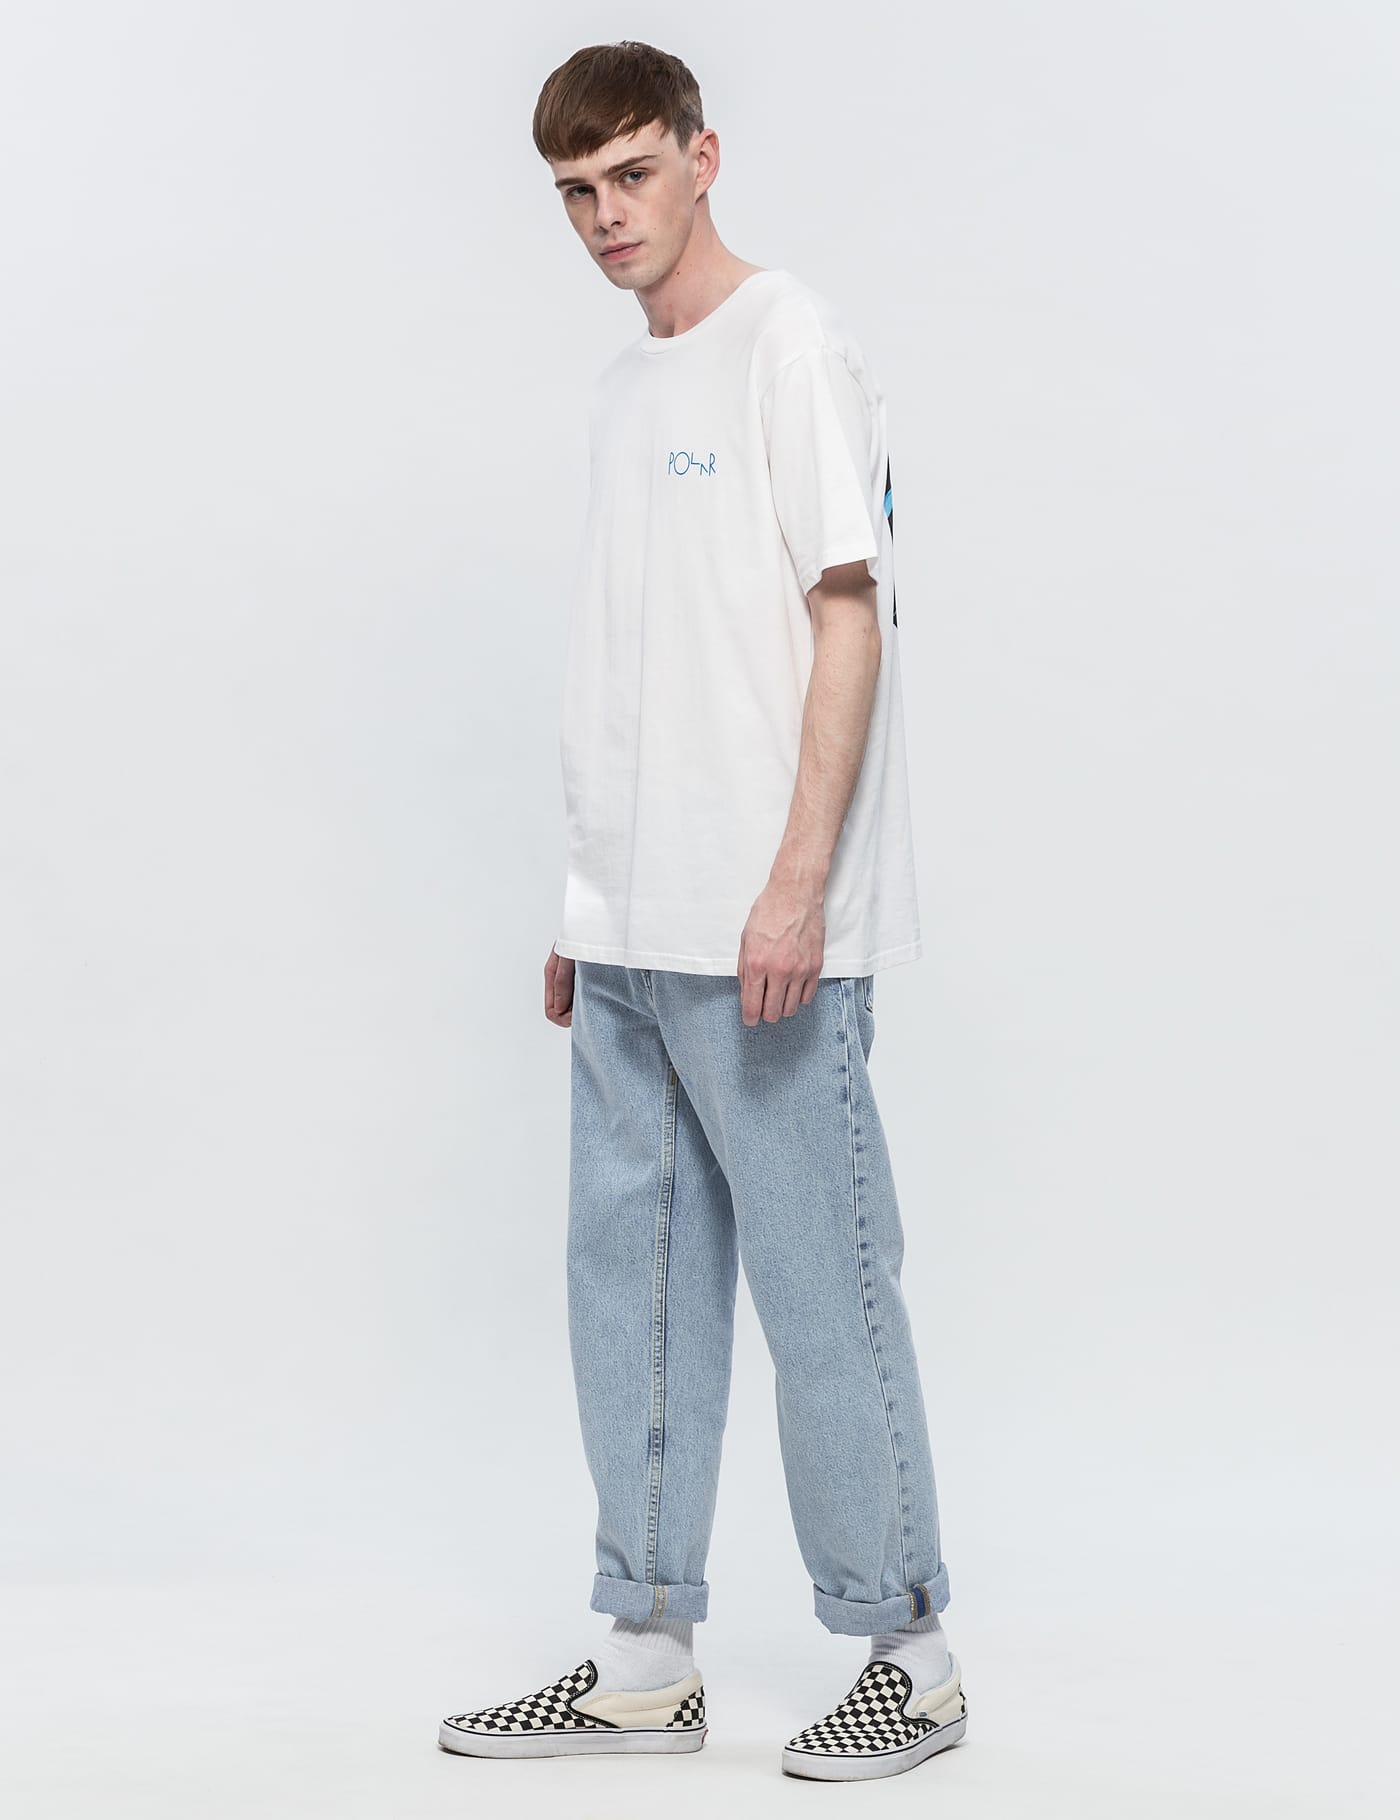 Polar Skate Co. - 90's Jeans | HBX - Globally Curated Fashion and Lifestyle  by Hypebeast